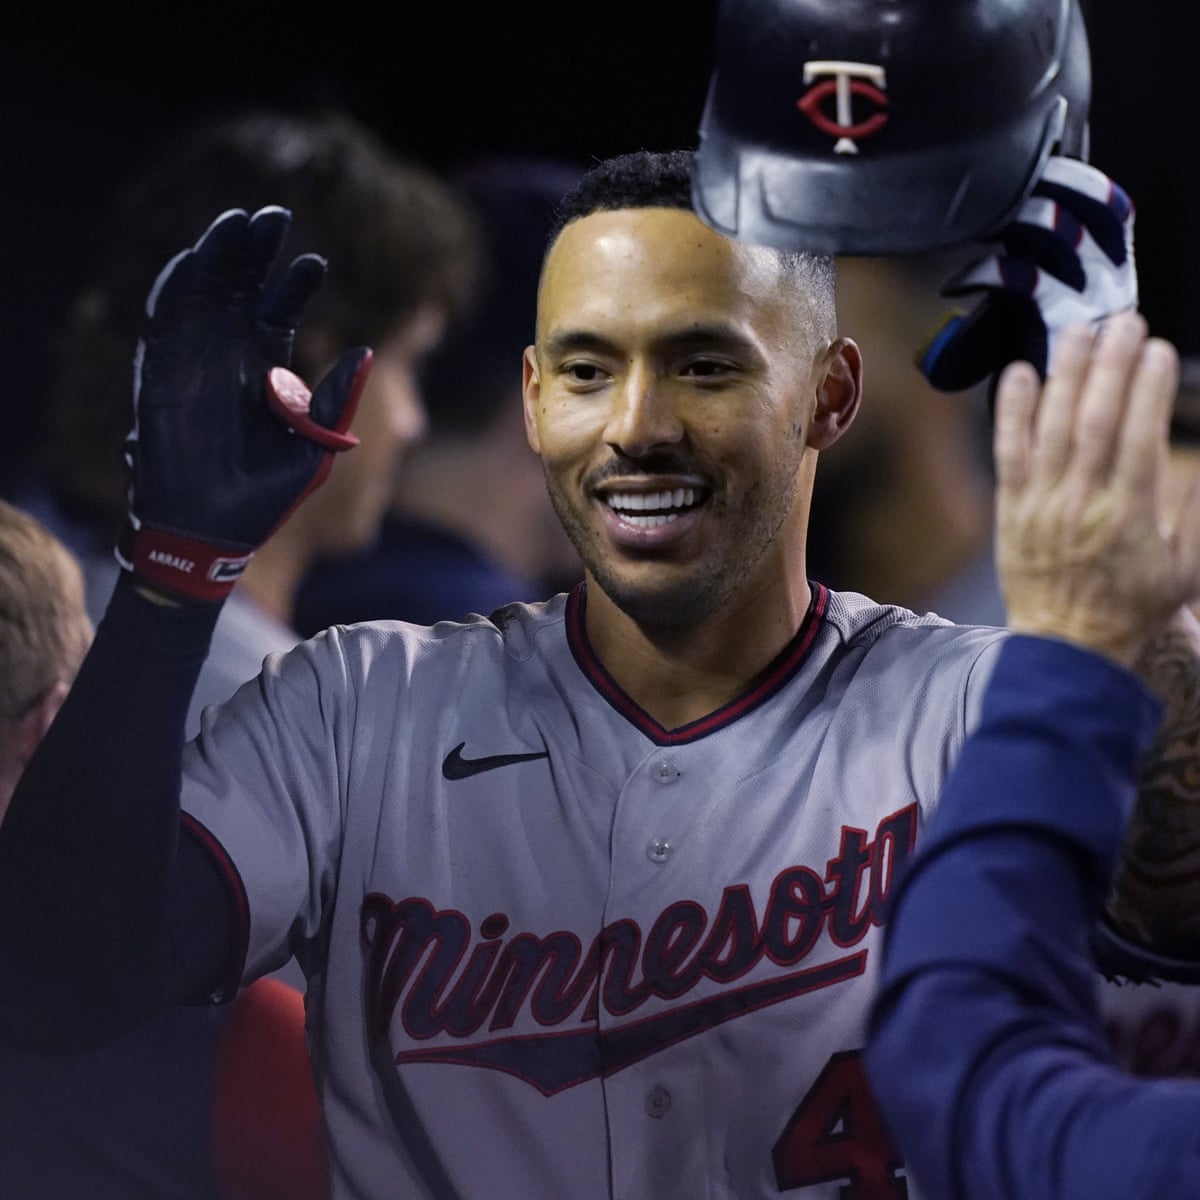 Carlos Correa opts out of Minnesota Twins contract